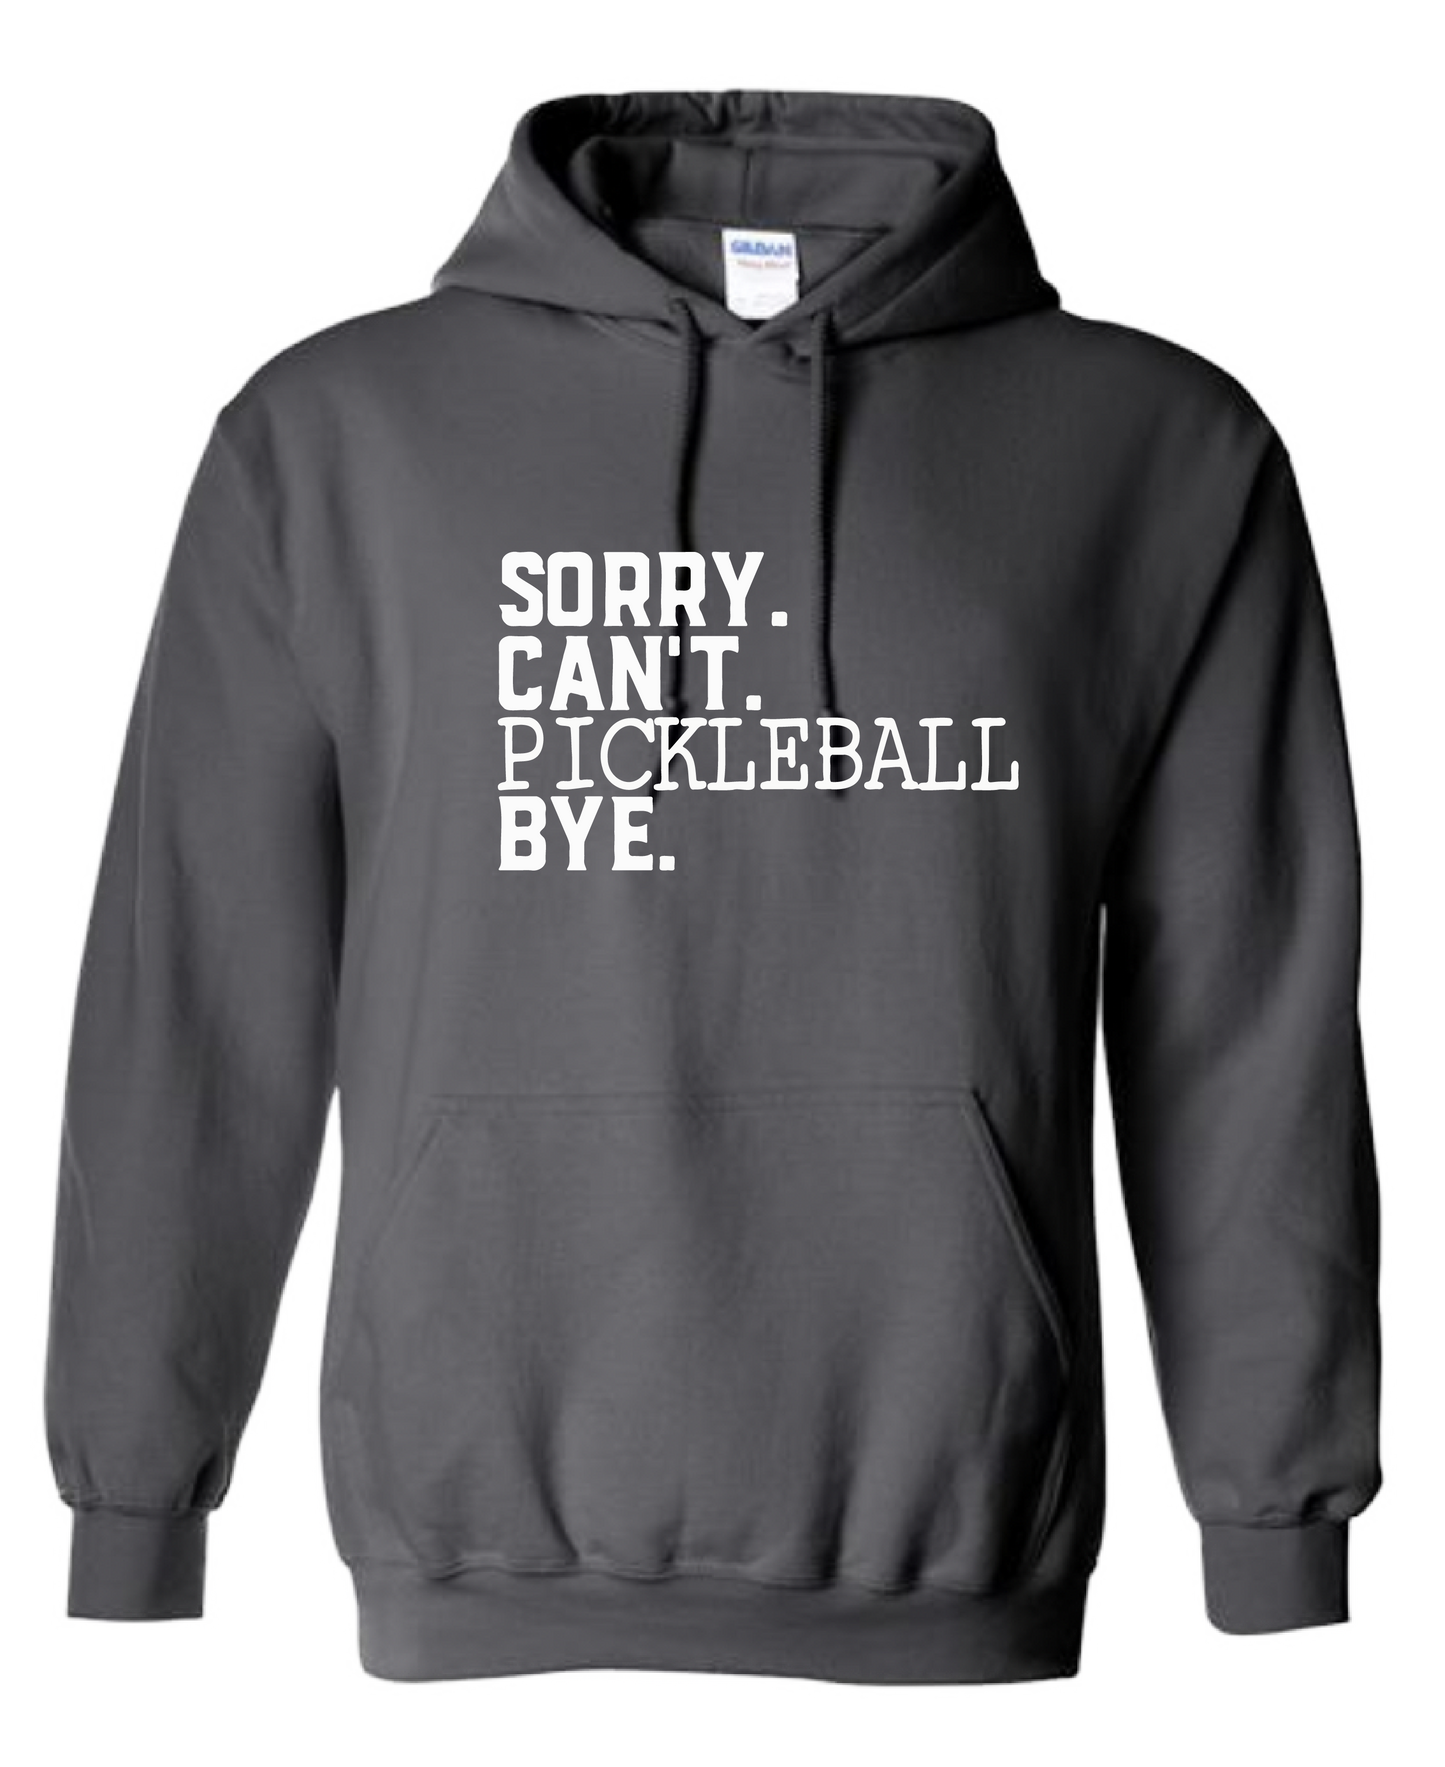 Sorry Can't Pickleball Bye | Unisex Hoodie Athletic Sweatshirt | 50% Cotton/50% Polyester